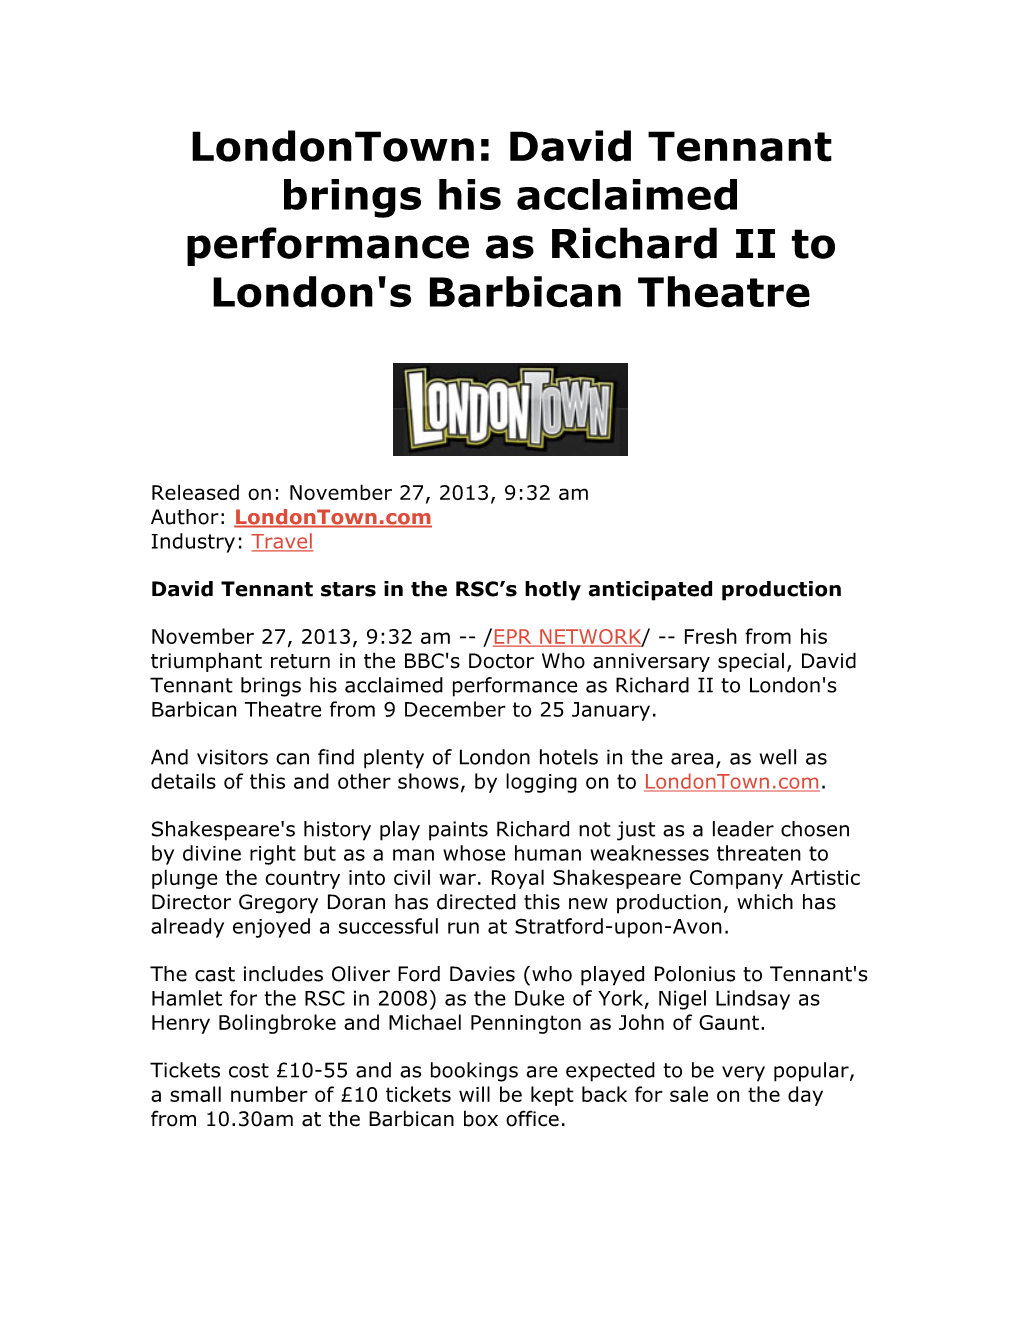 David Tennant Brings His Acclaimed Performance As Richard II to London's Barbican Theatre